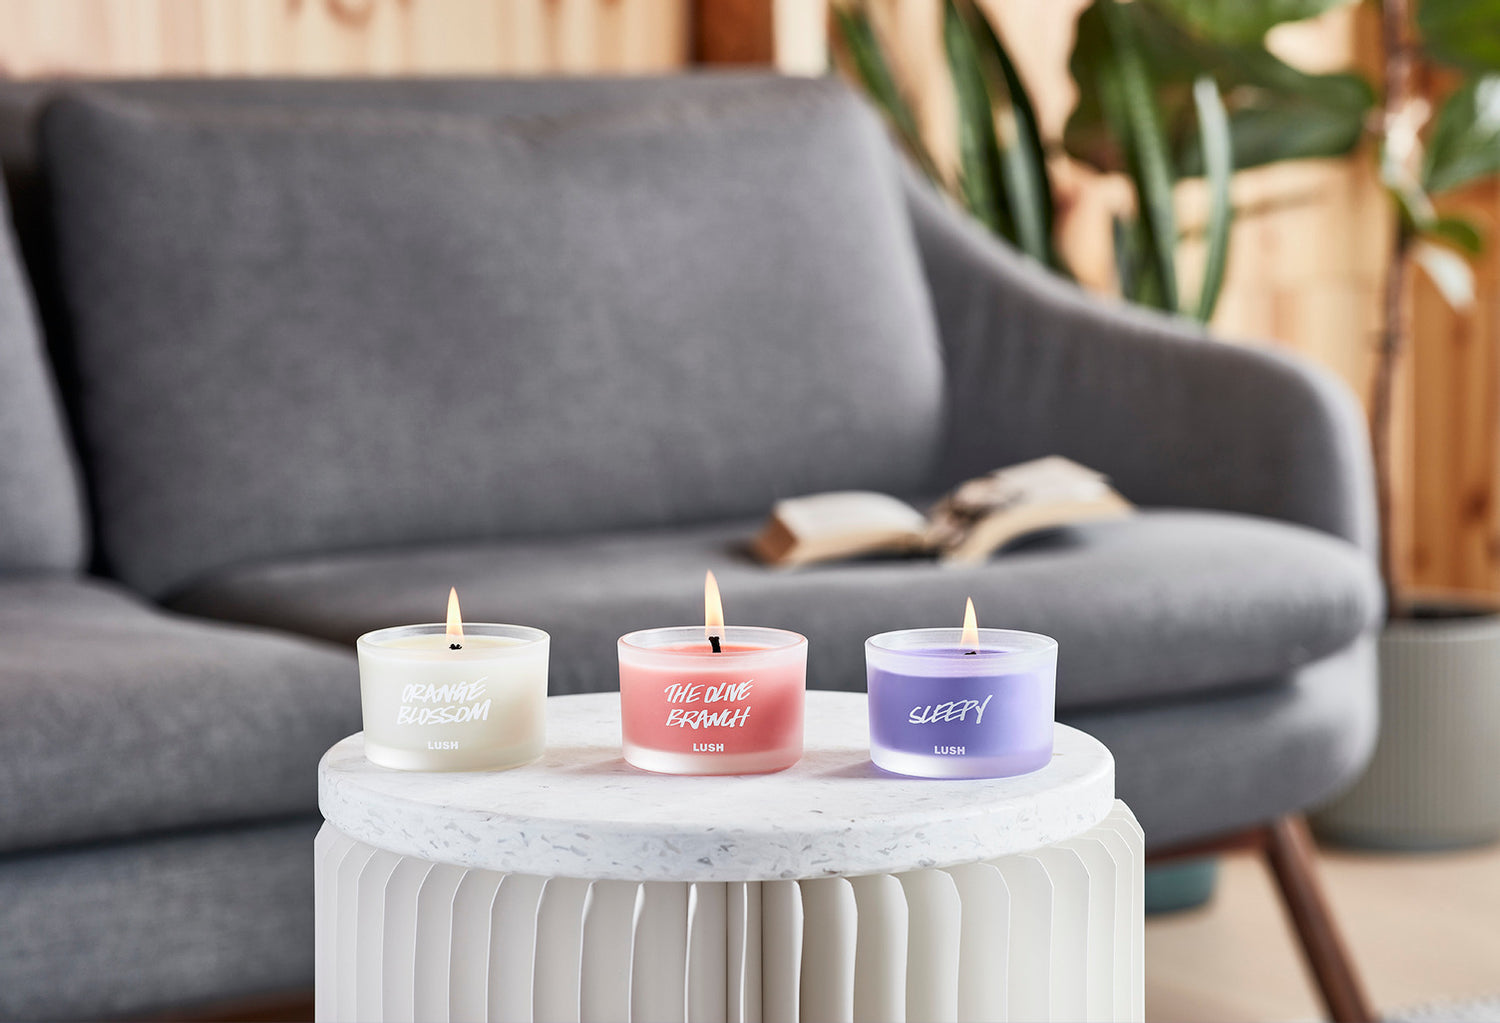 Light it up: crazy about candles